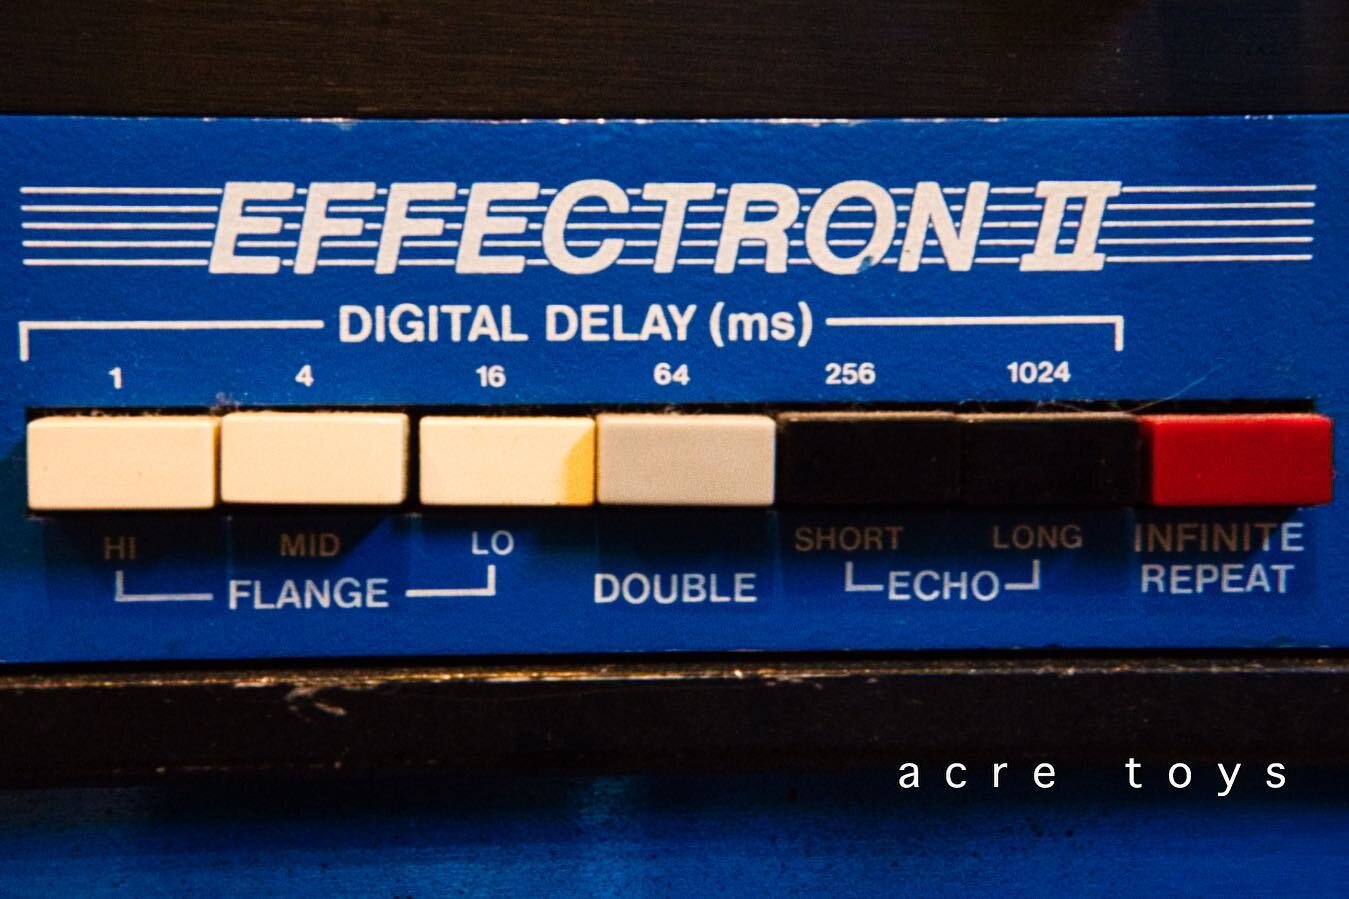 Acre toys #18 Deltalab ADM EFFECTRON II 1024

These scribblings are independent thoughts with no affiliation to any company and will be intentionally unscientific&hellip;

Mostly you want equipment that does it&rsquo;s job right, sometimes you covet 